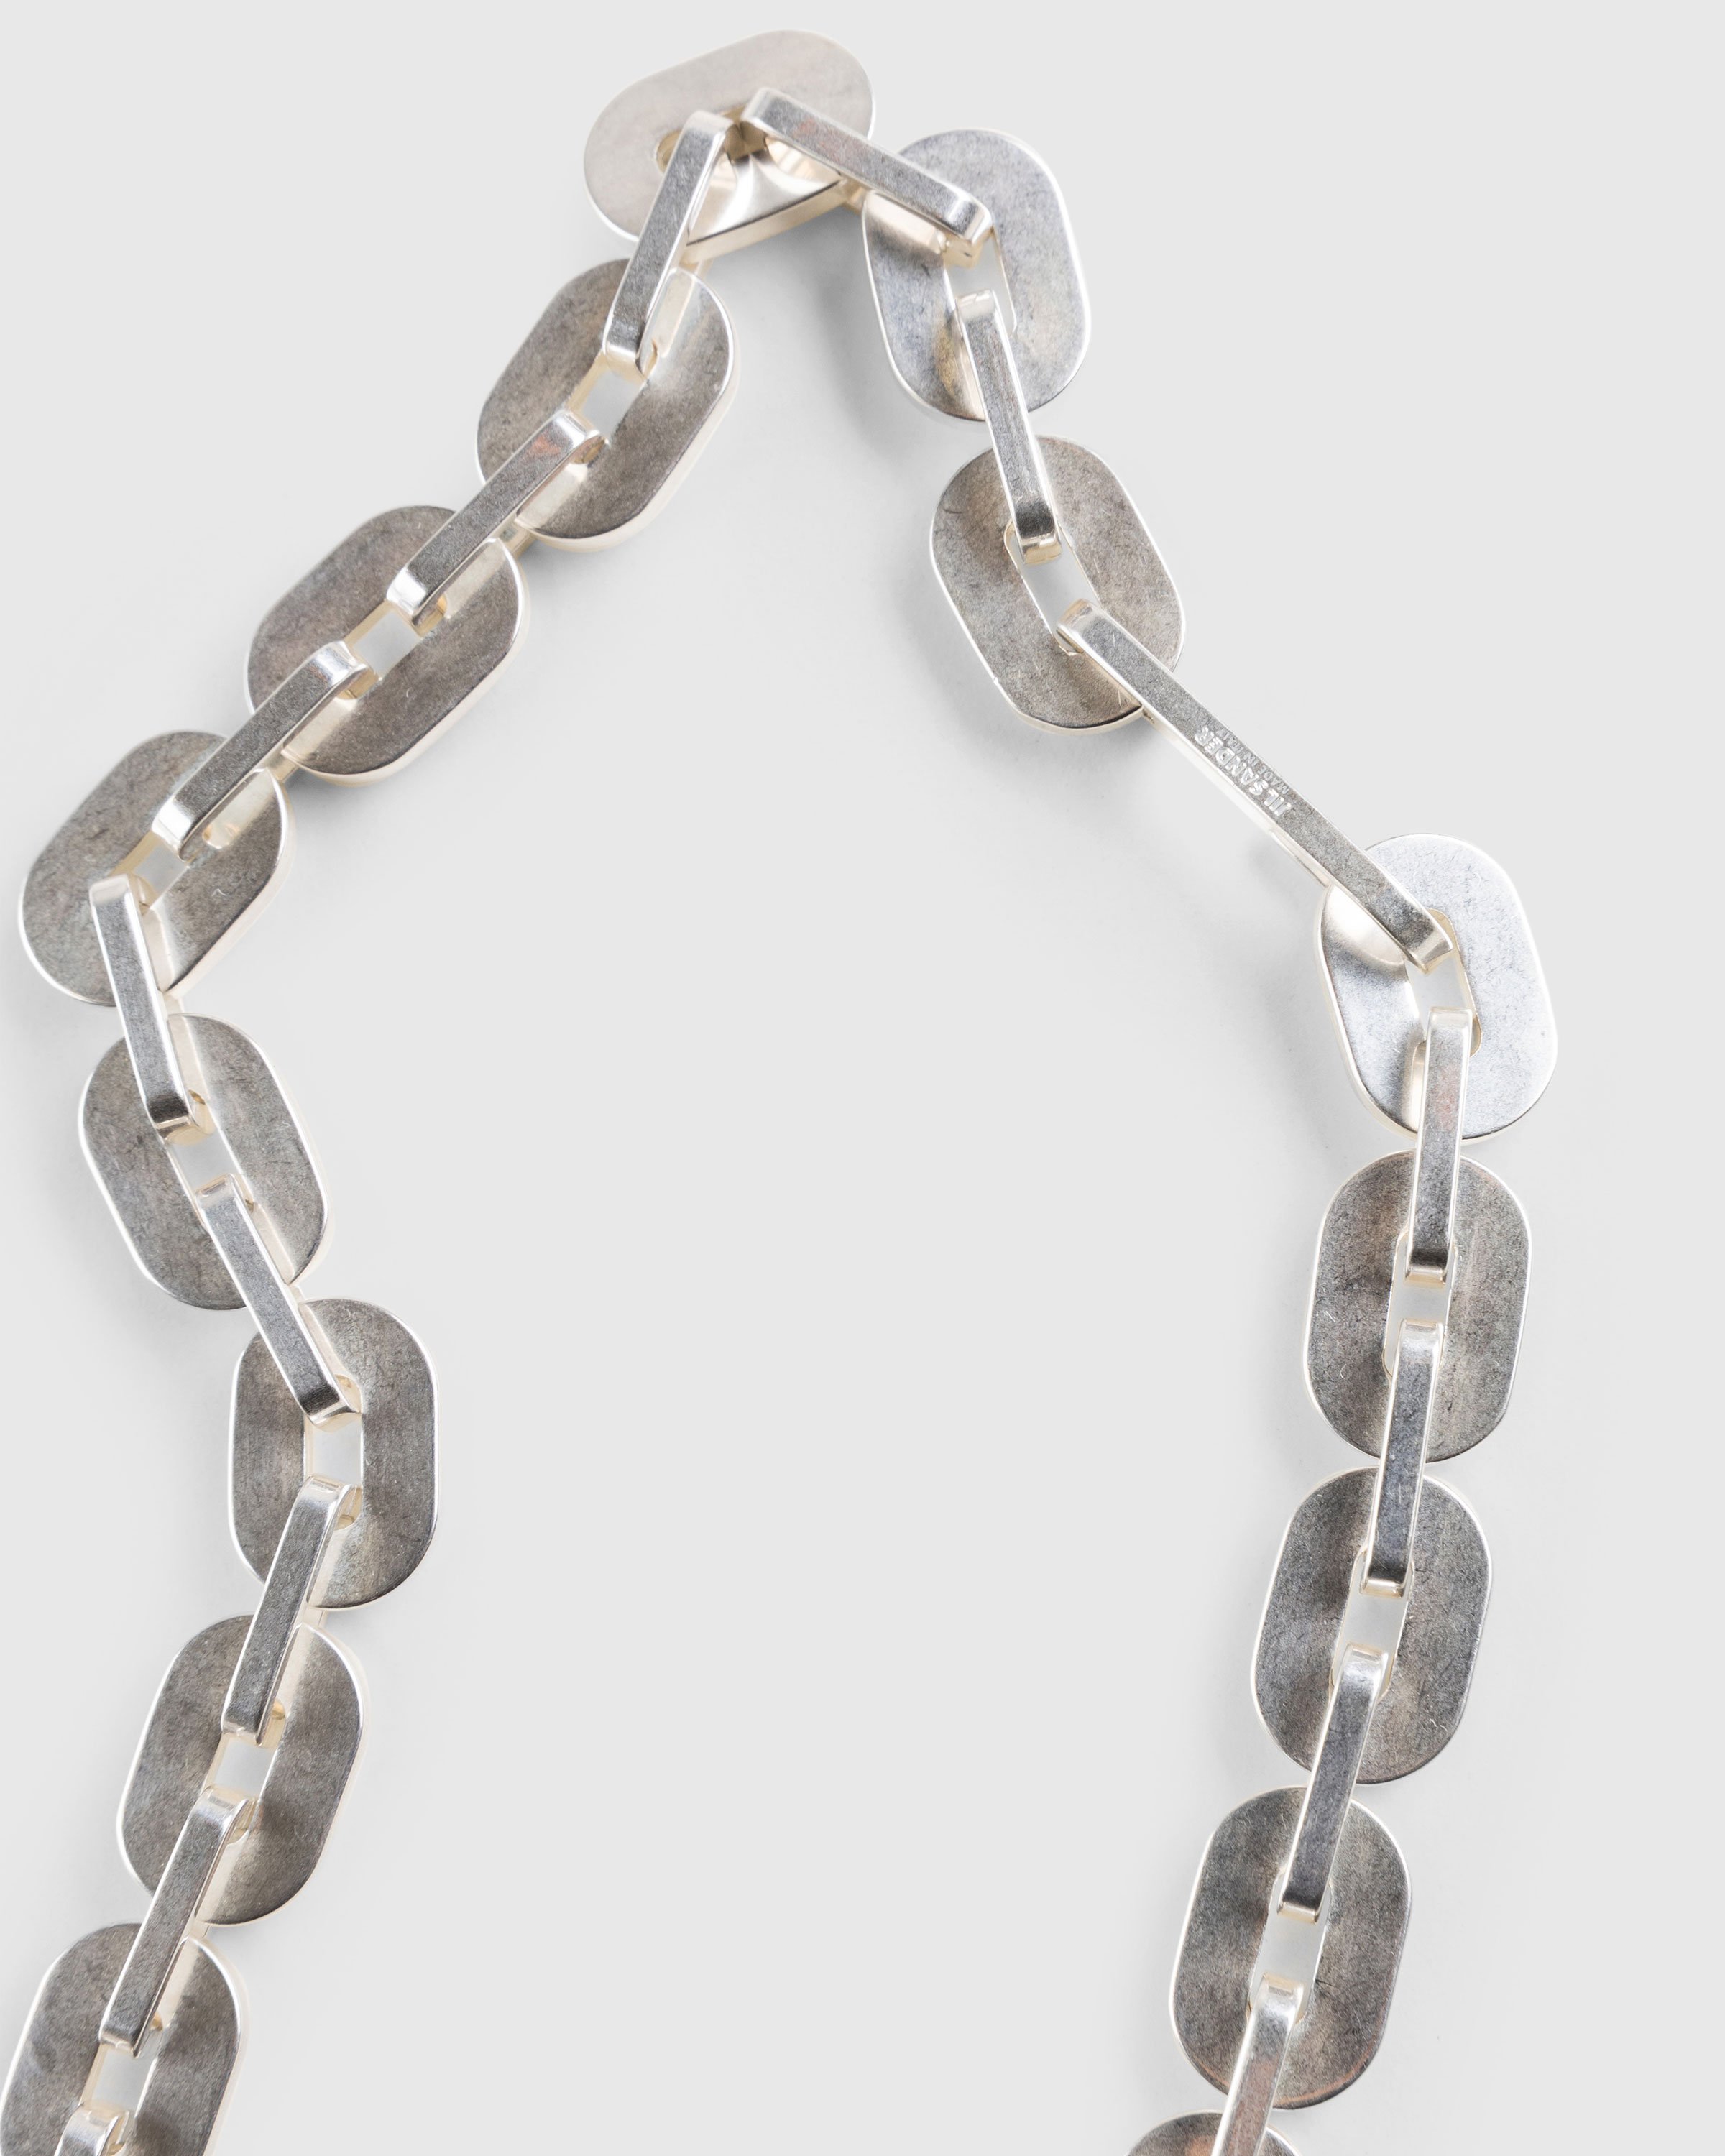 Jil Sander - Brass Chain Necklace Silver - Accessories - Silver - Image 3